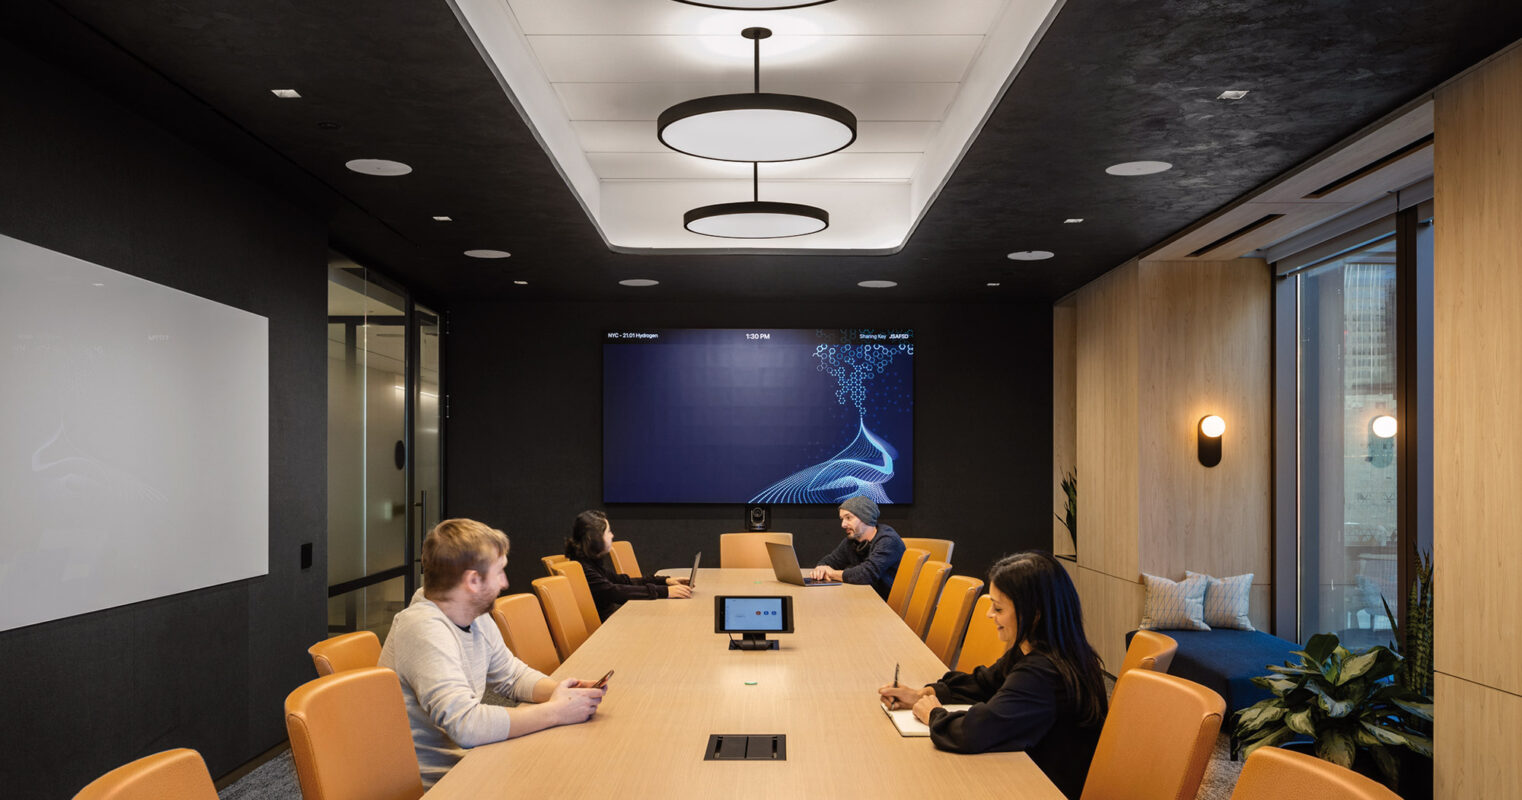 Modern corporate meeting room with a sleek design, featuring a long table with individuals engaged in a discussion, ambient lighting from circular fixtures above, and large screens for presentations on the wall.